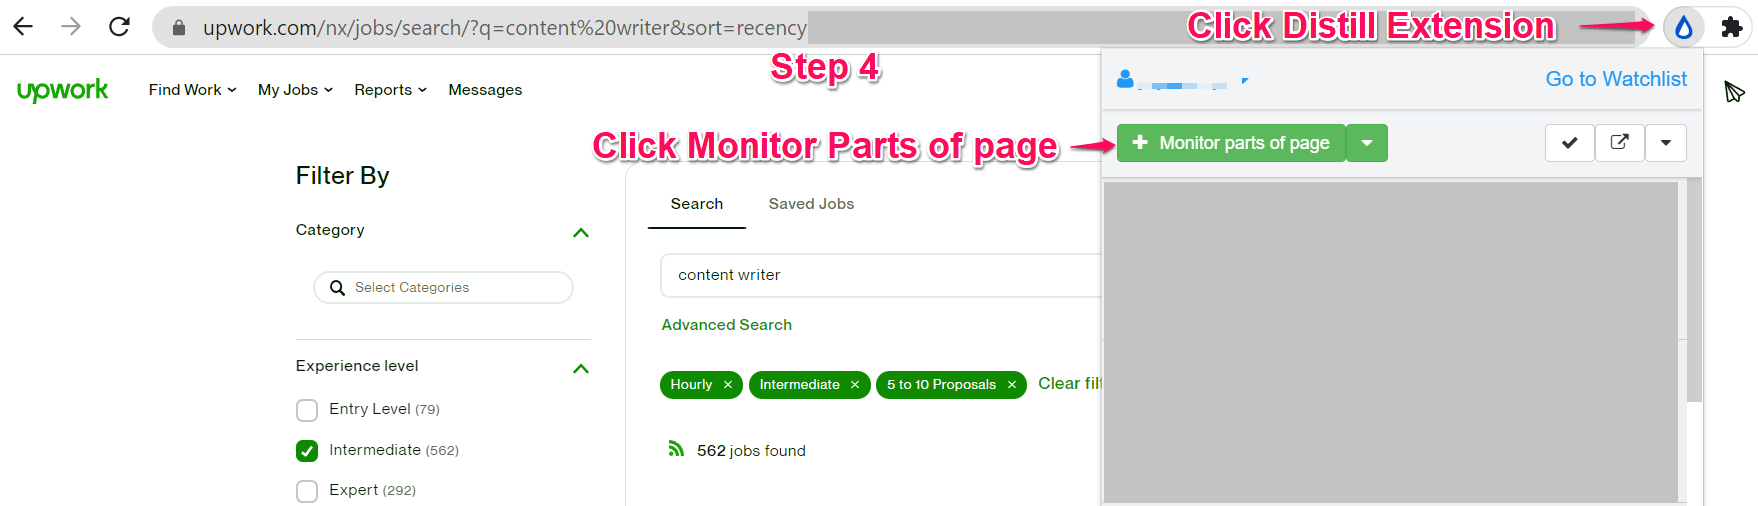 Select Monitor parts of the page